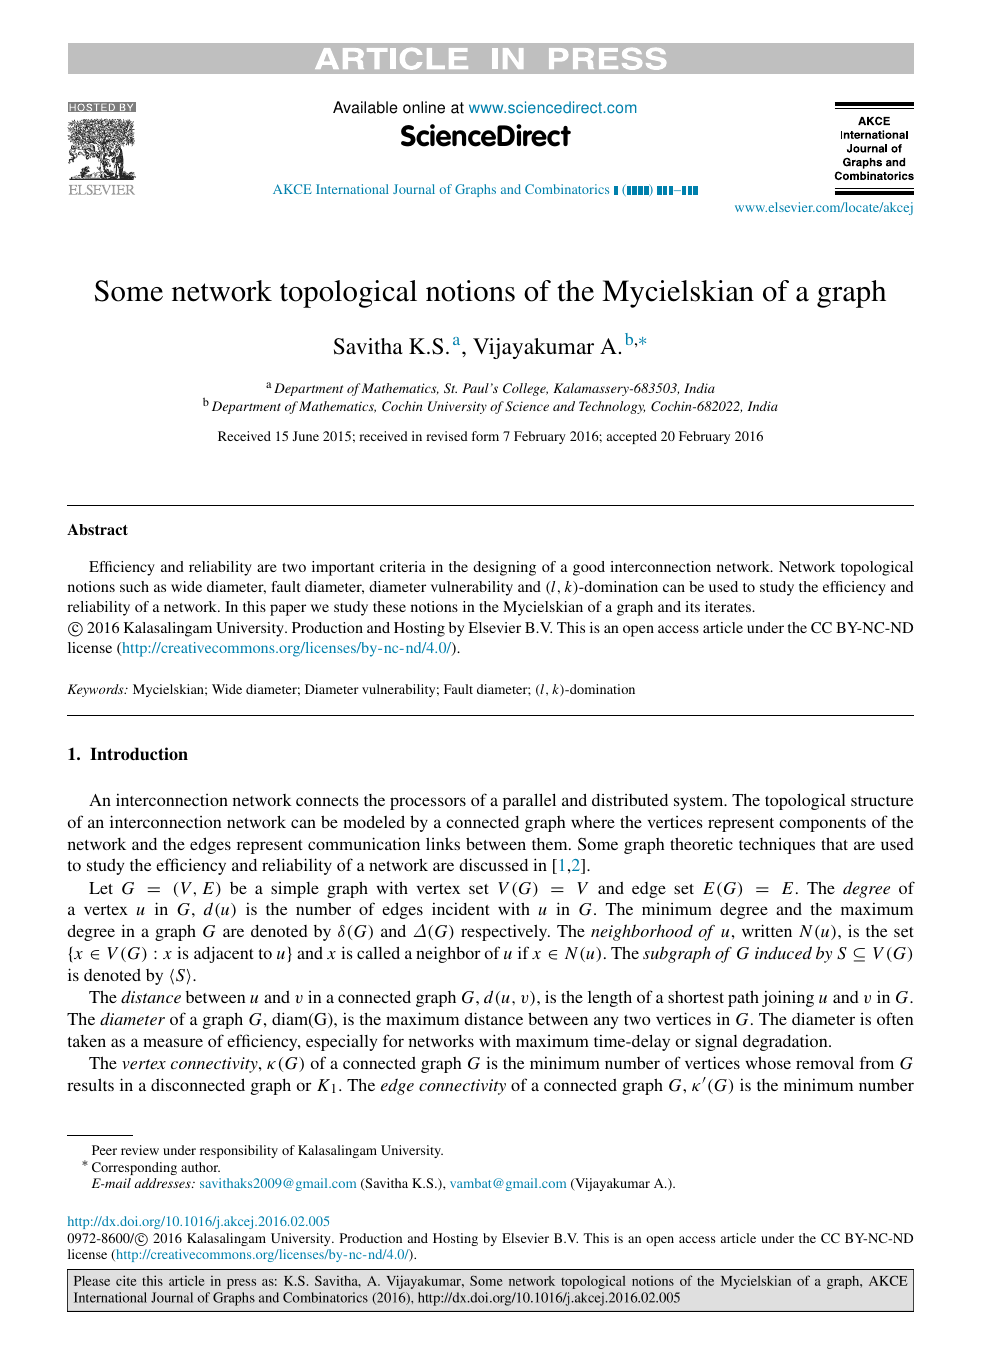 Some Network Topological Notions Of The Mycielskian Of A Graph Topic Of Research Paper In Computer And Information Sciences Download Scholarly Article Pdf And Read For Free On Cyberleninka Open Science